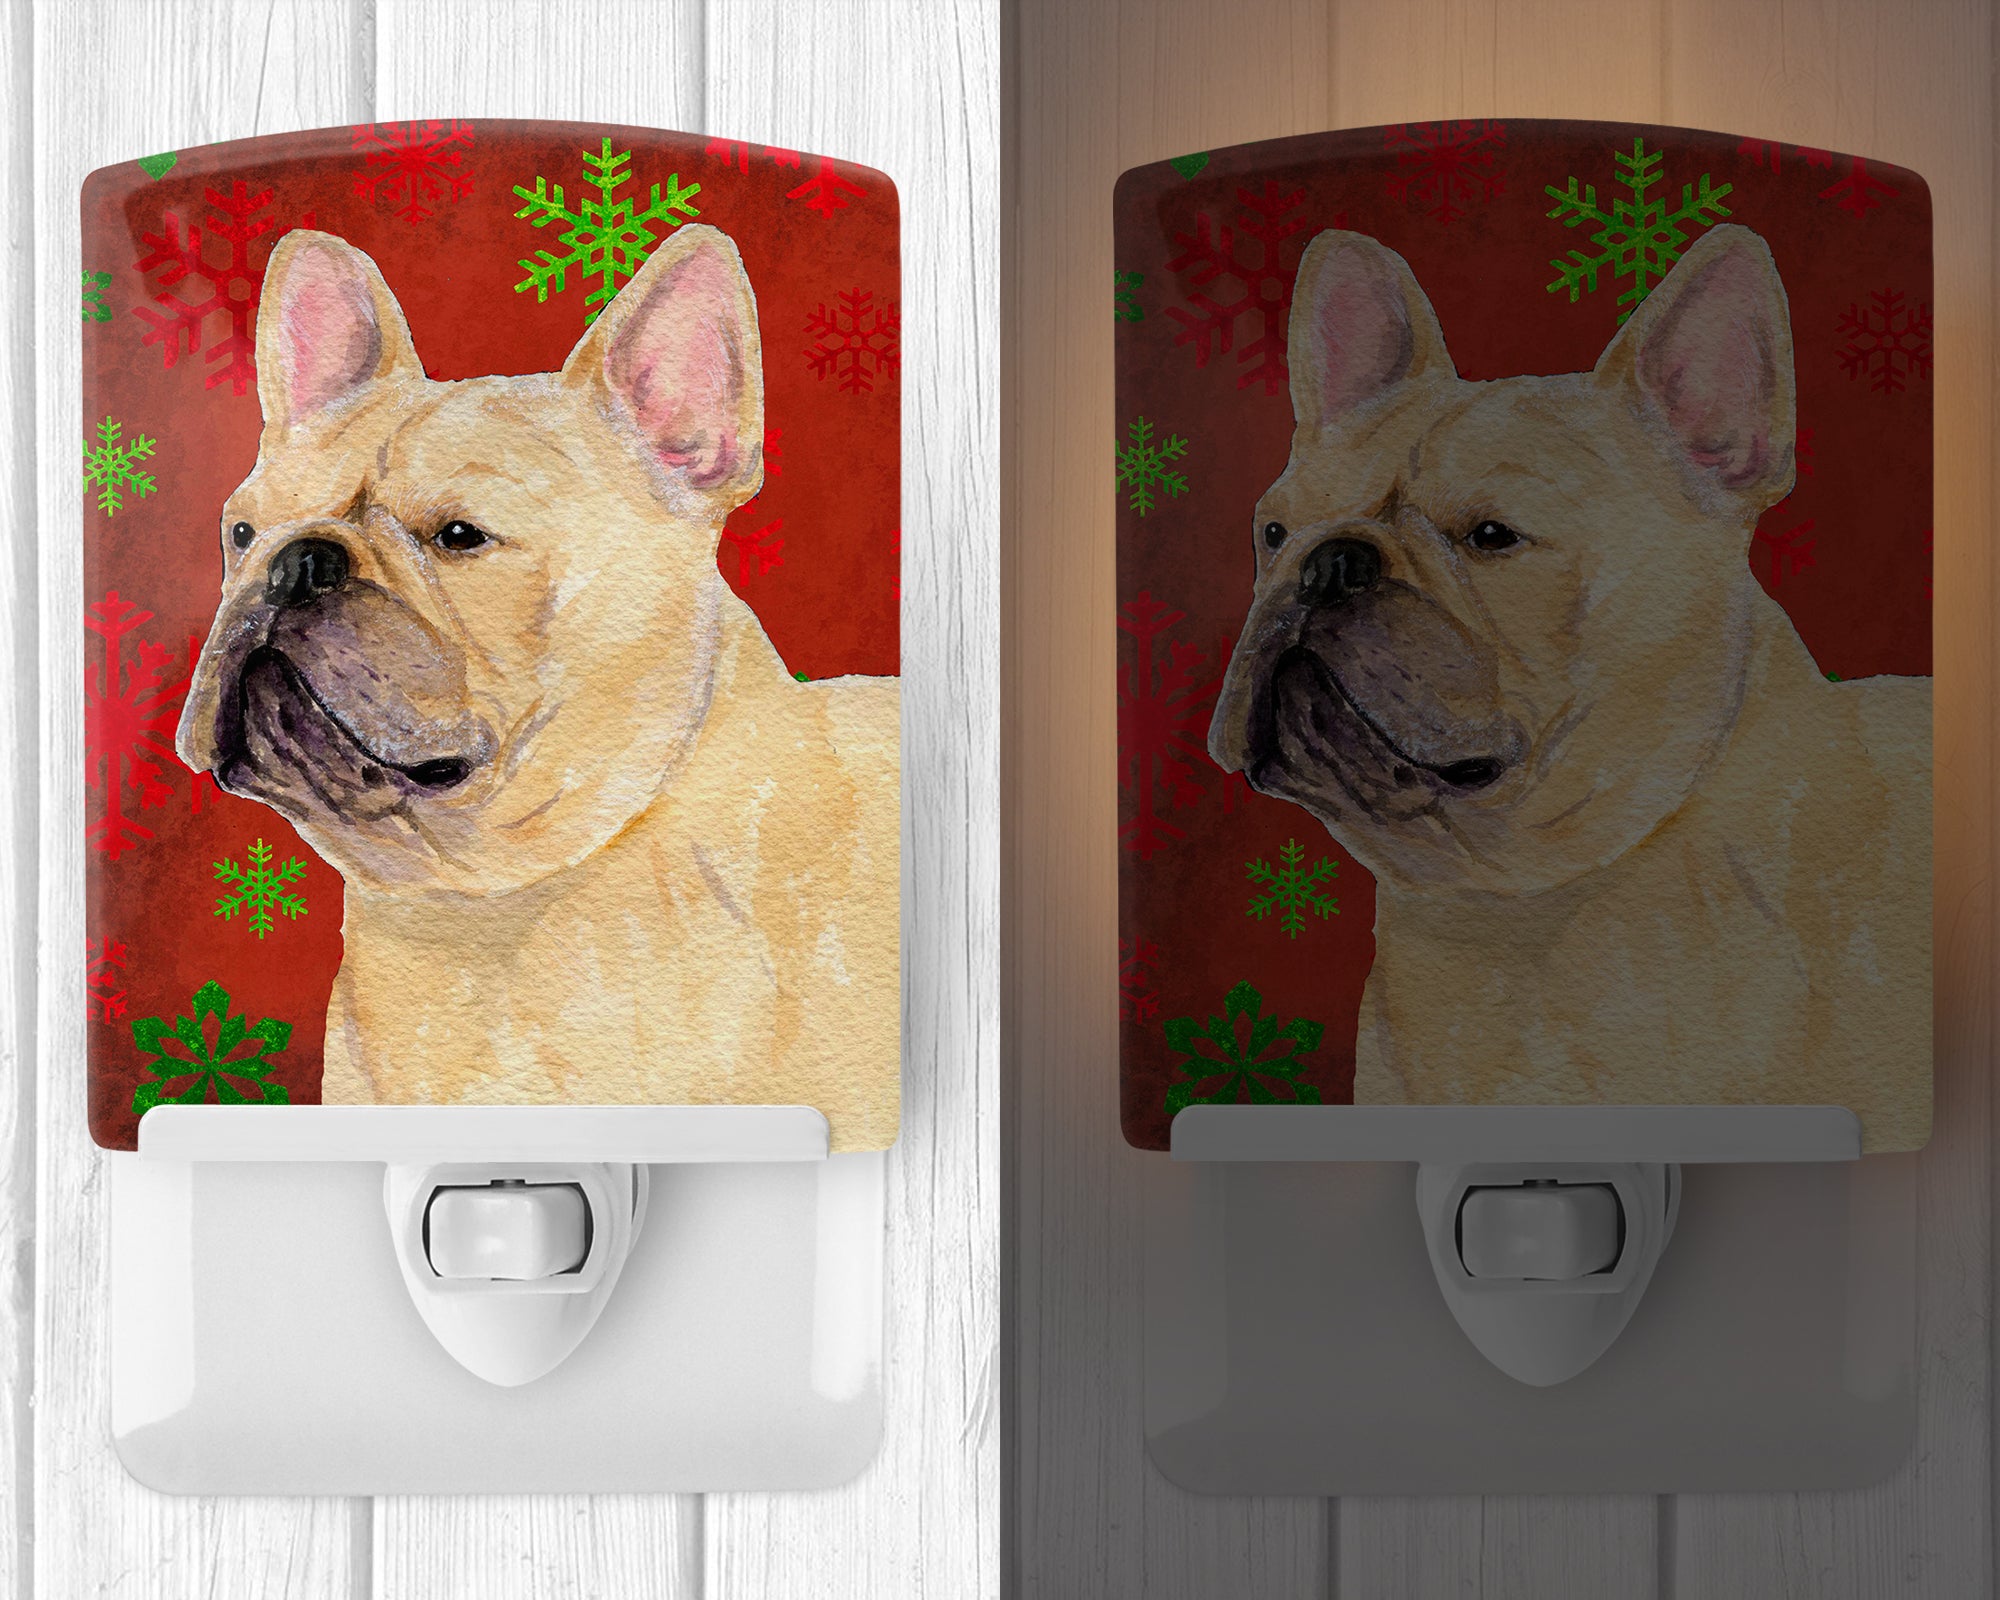 French Bulldog Red and Green Snowflakes Holiday Christmas Ceramic Night Light SS4692CNL - the-store.com